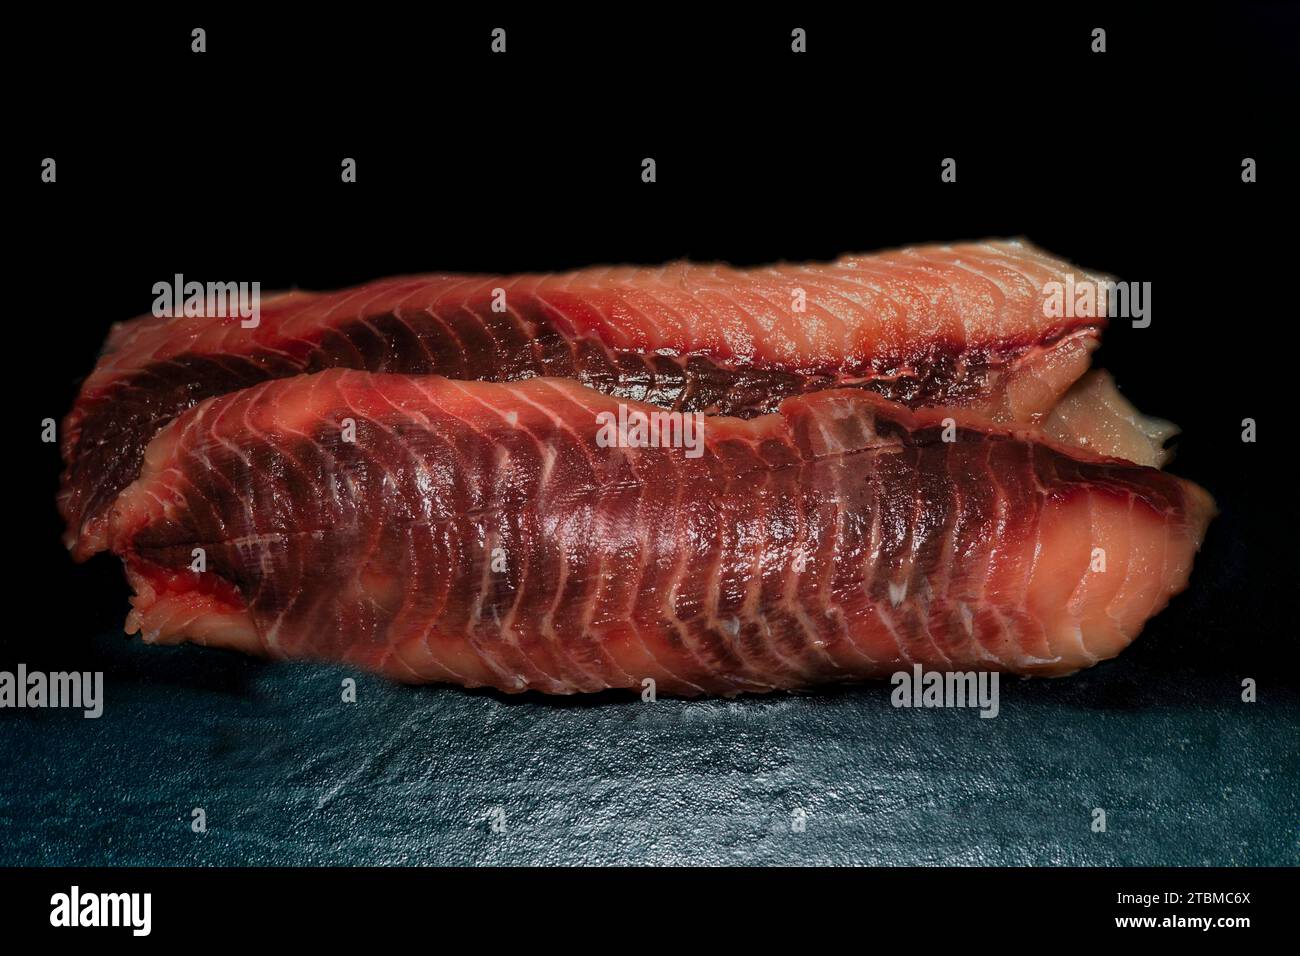 Trimmed fillets of grass carp (Ctenopharyngodon idella), also known as white Amur, wild catch from Myramar, food photography with black background Stock Photo